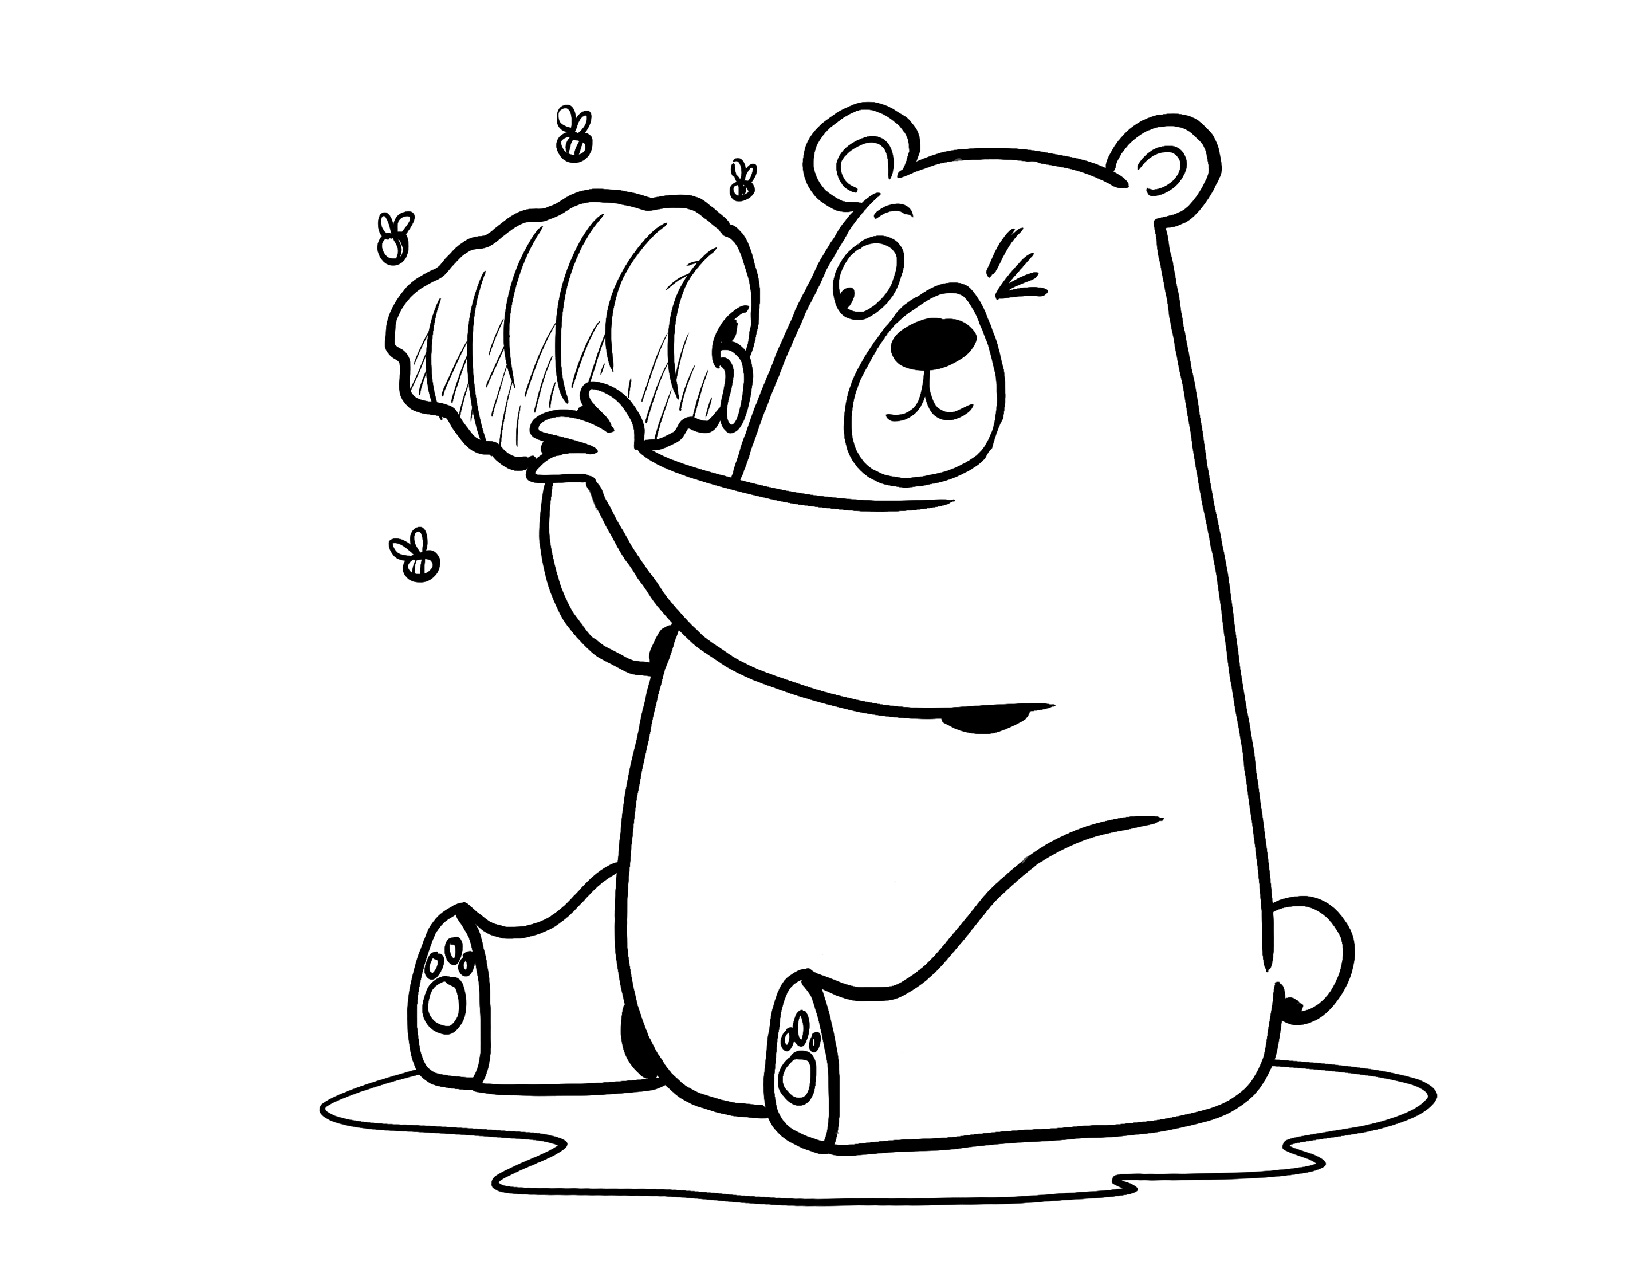 Coloring page of A Bear looking in a bees nest